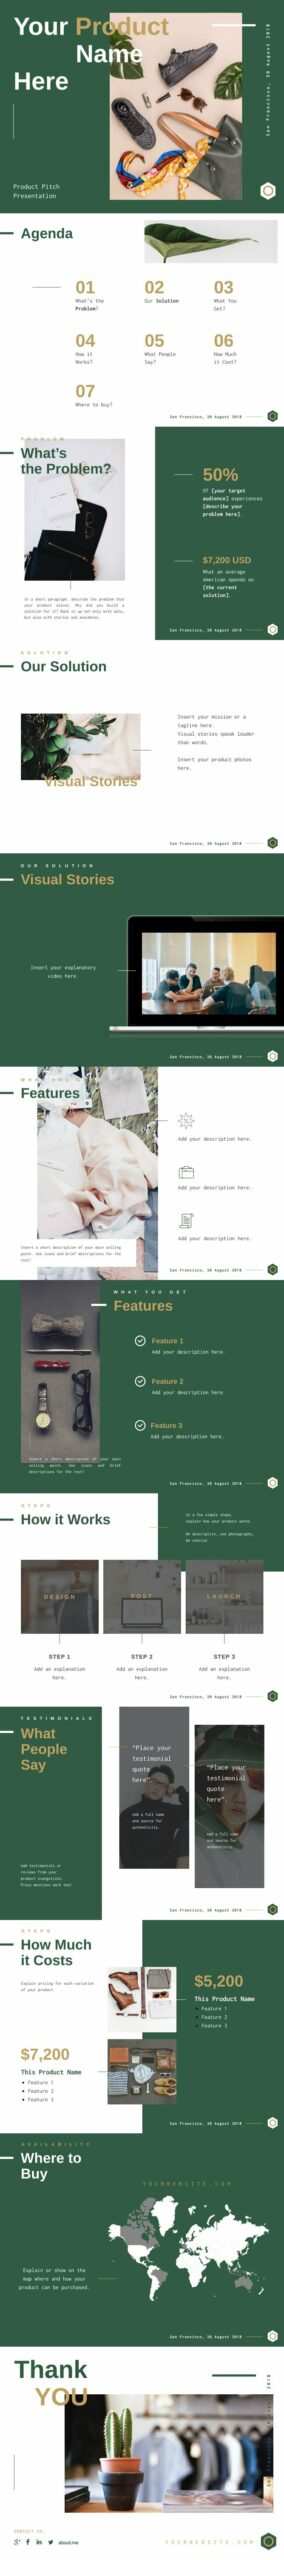 Product Pitch Presentation Template